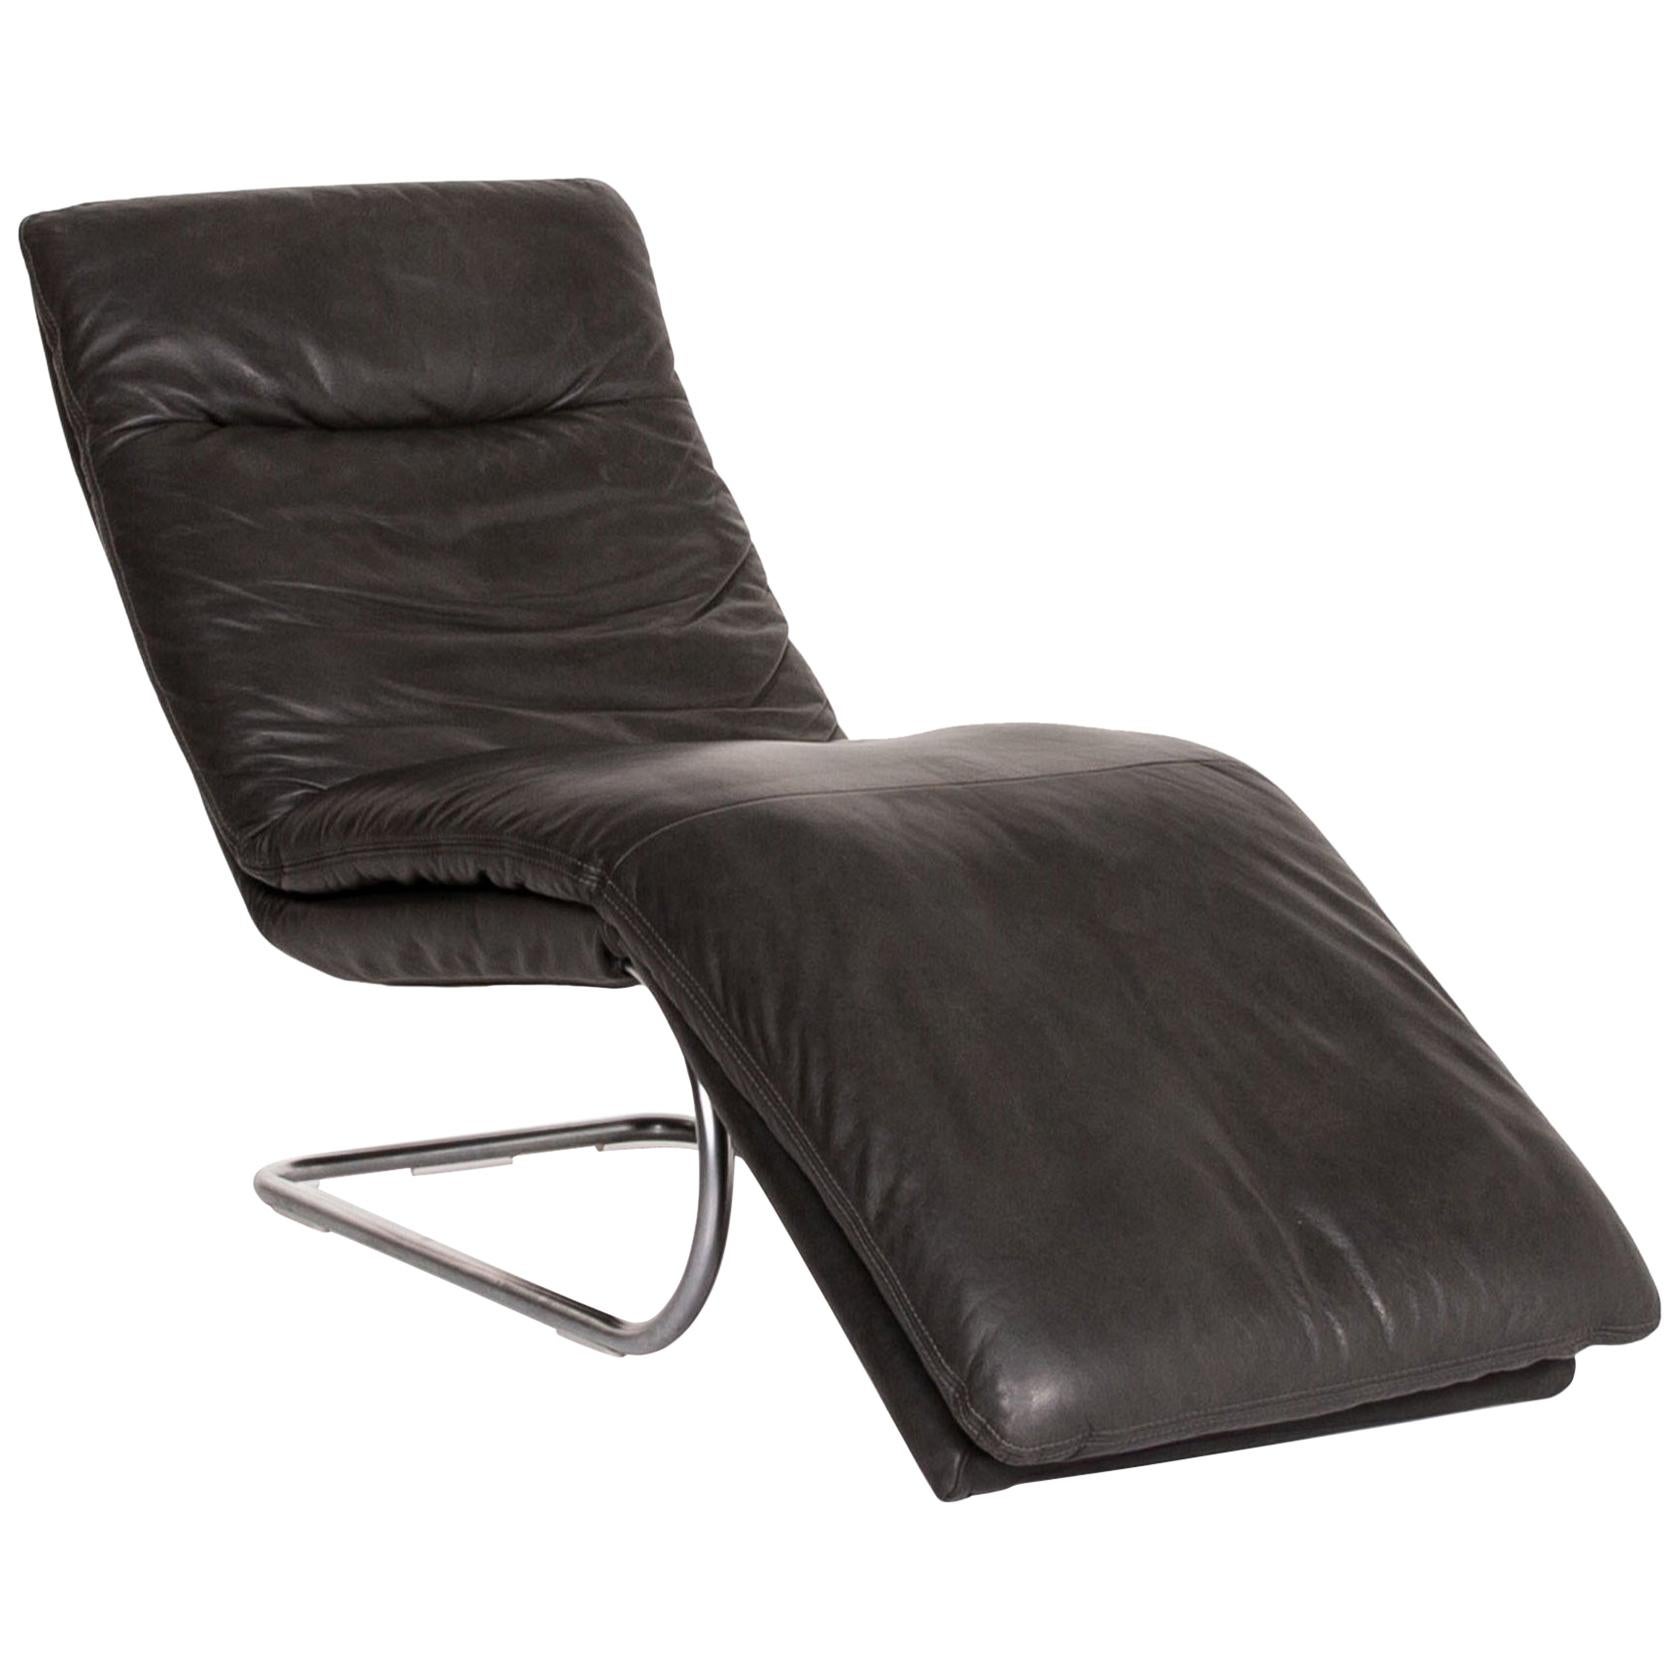 Willi Schillig Jill Leather Lounger Gray Relax lounger For Sale